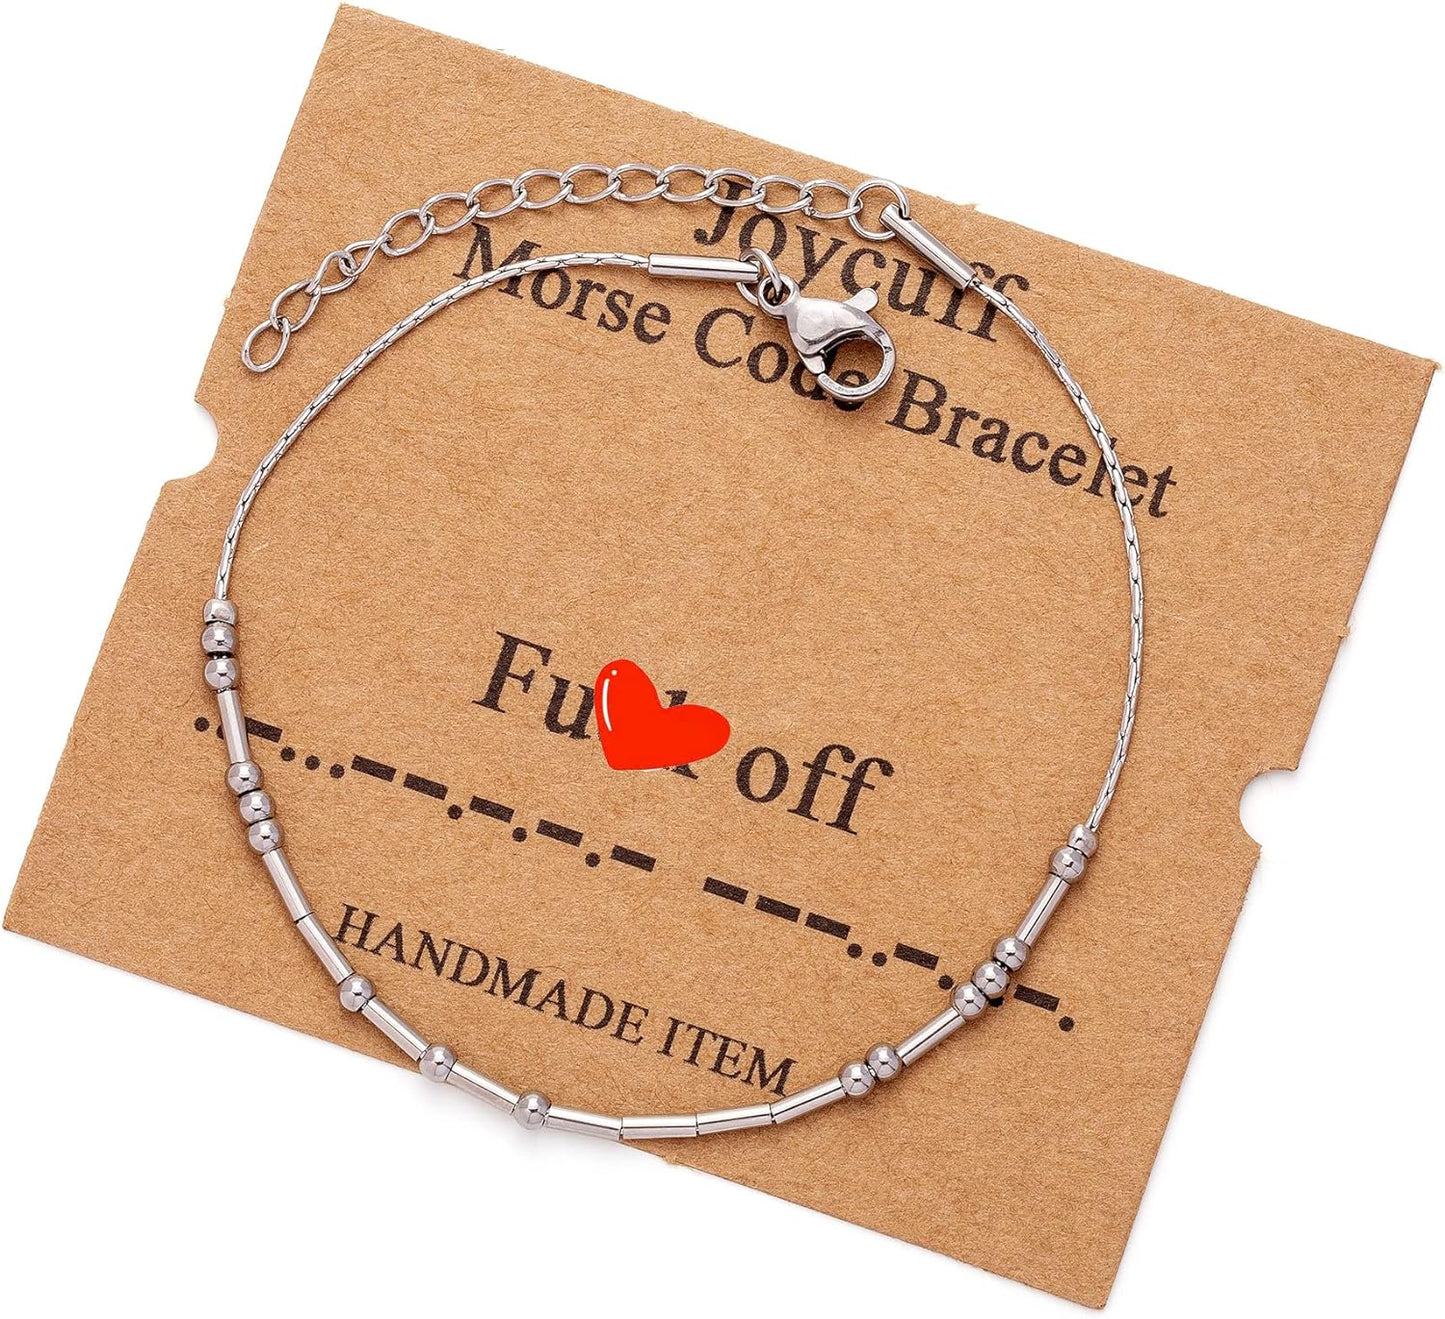 JoycuFF Inspirational Morse Code Bracelets for Women Silver Beads Jewelry Encouragement Mantra Gifts for Her